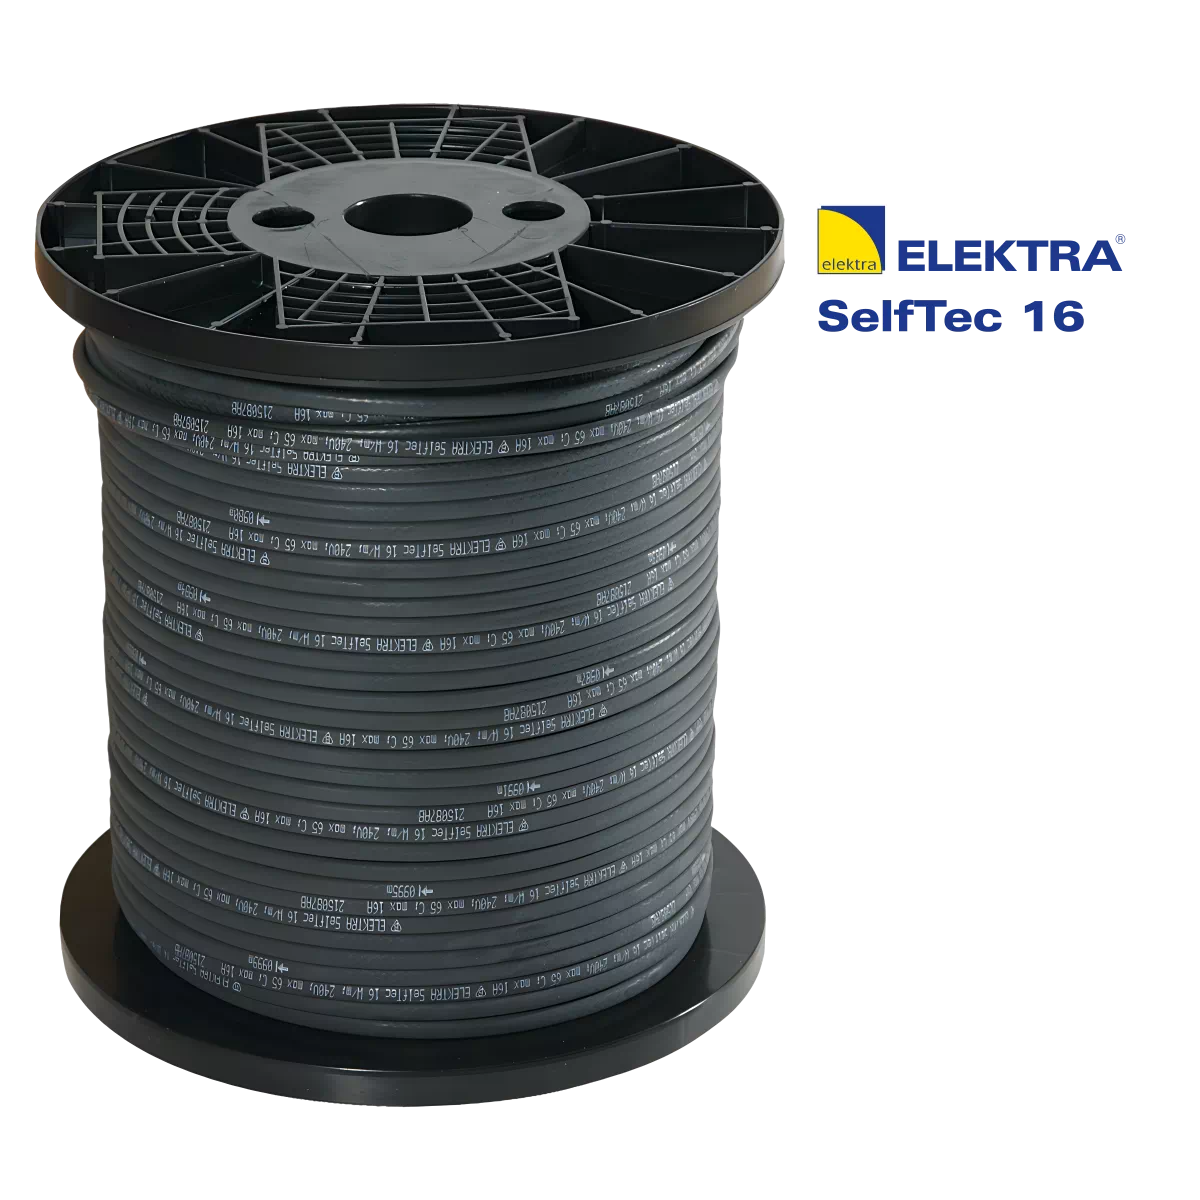 ELEKTRA-SelfTec-16-Electric-Heating-Cable